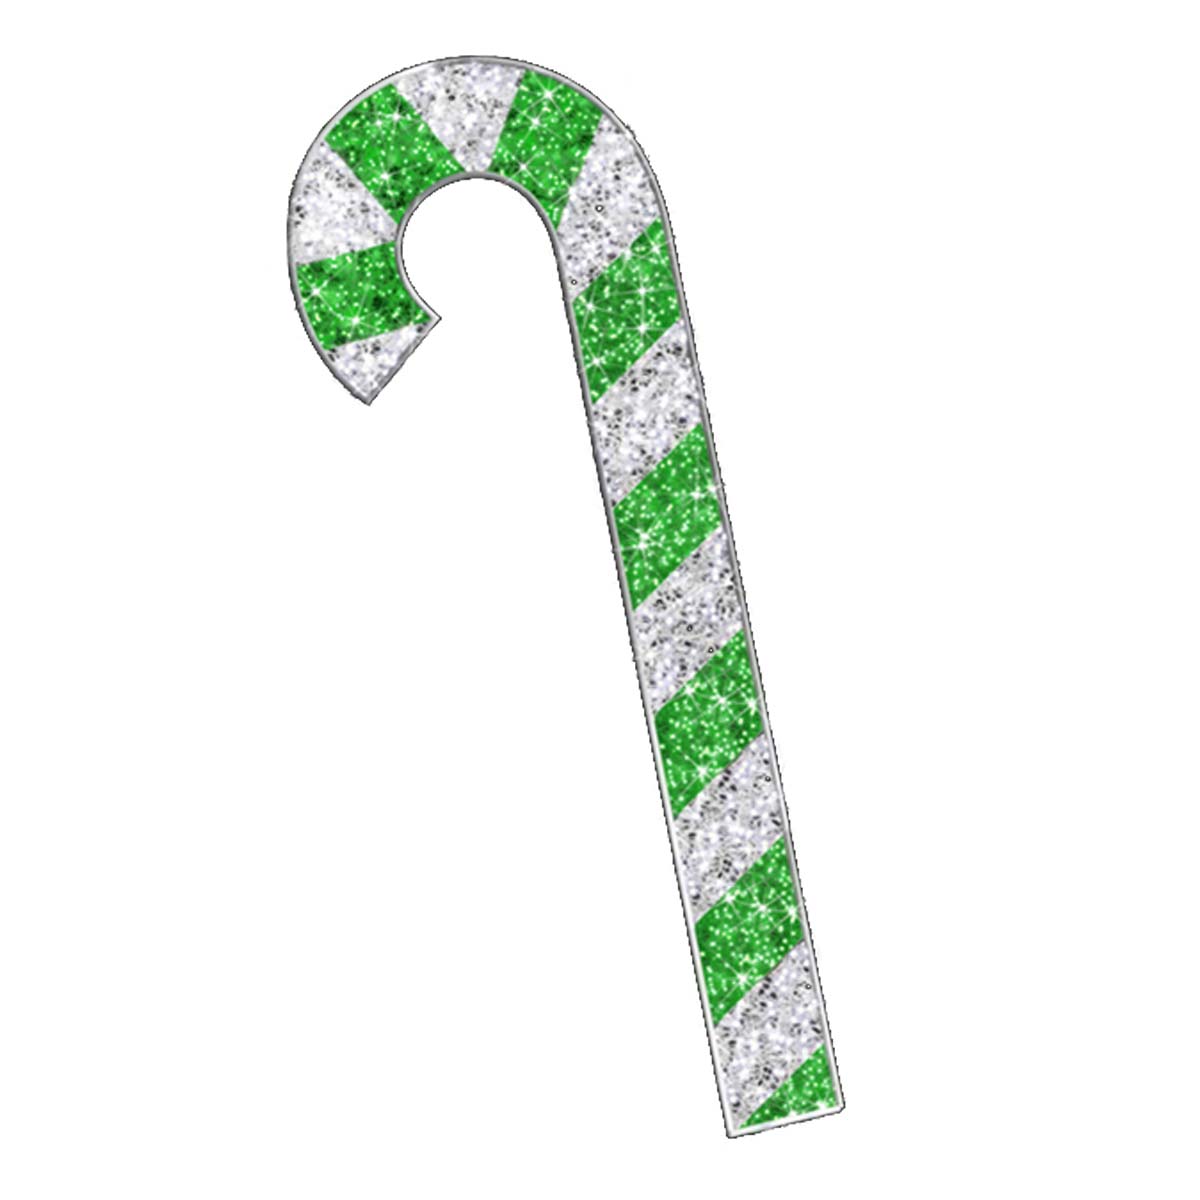 2D Green and Silver Candy Cane Display